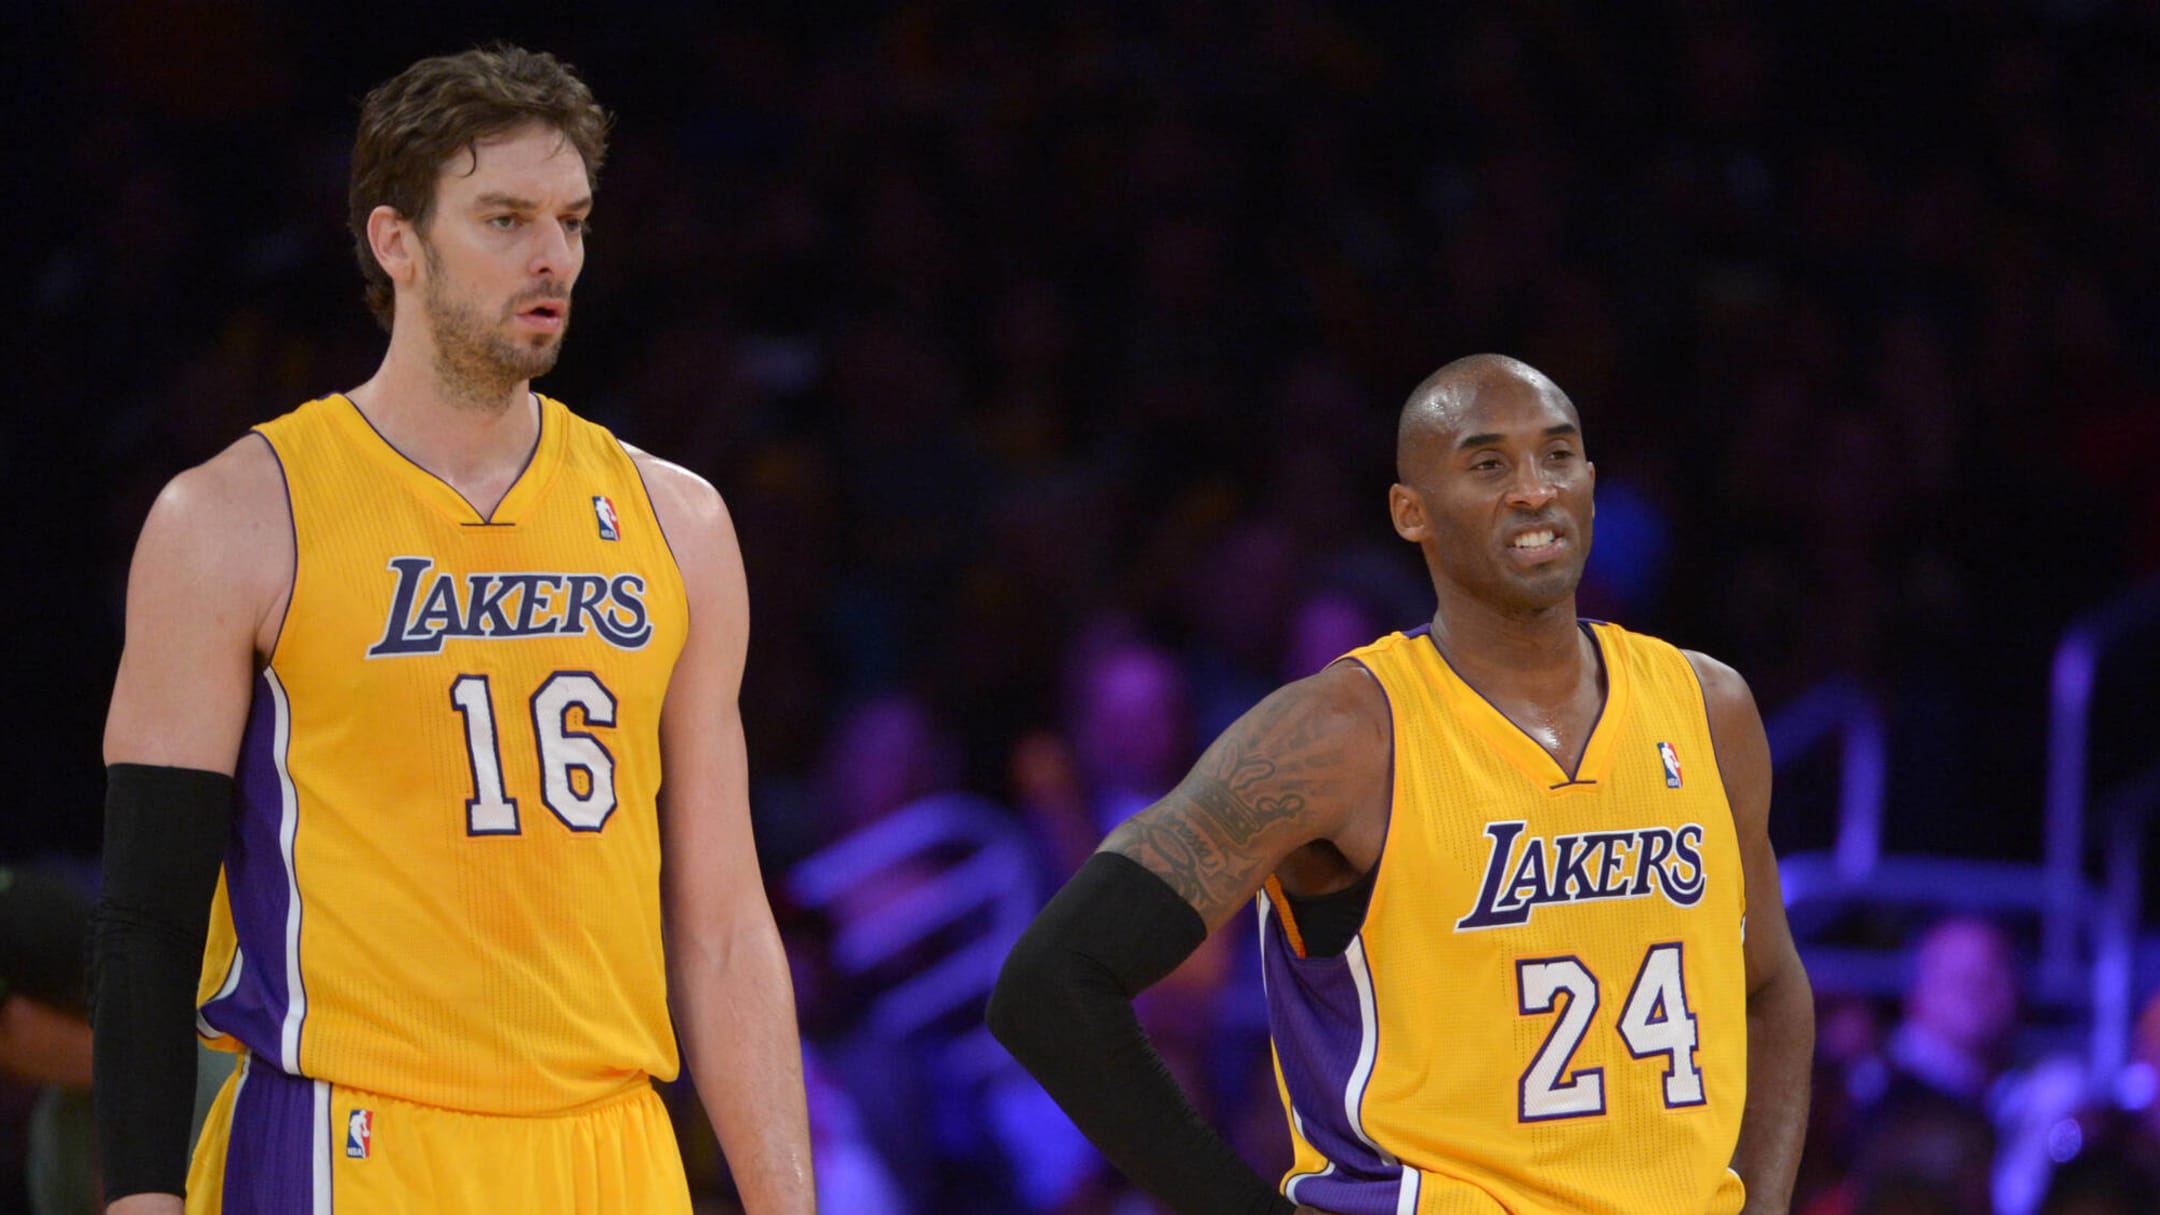 Lakers News: Pau Gasol Got 'Emotional' After Watching Game 7 Of